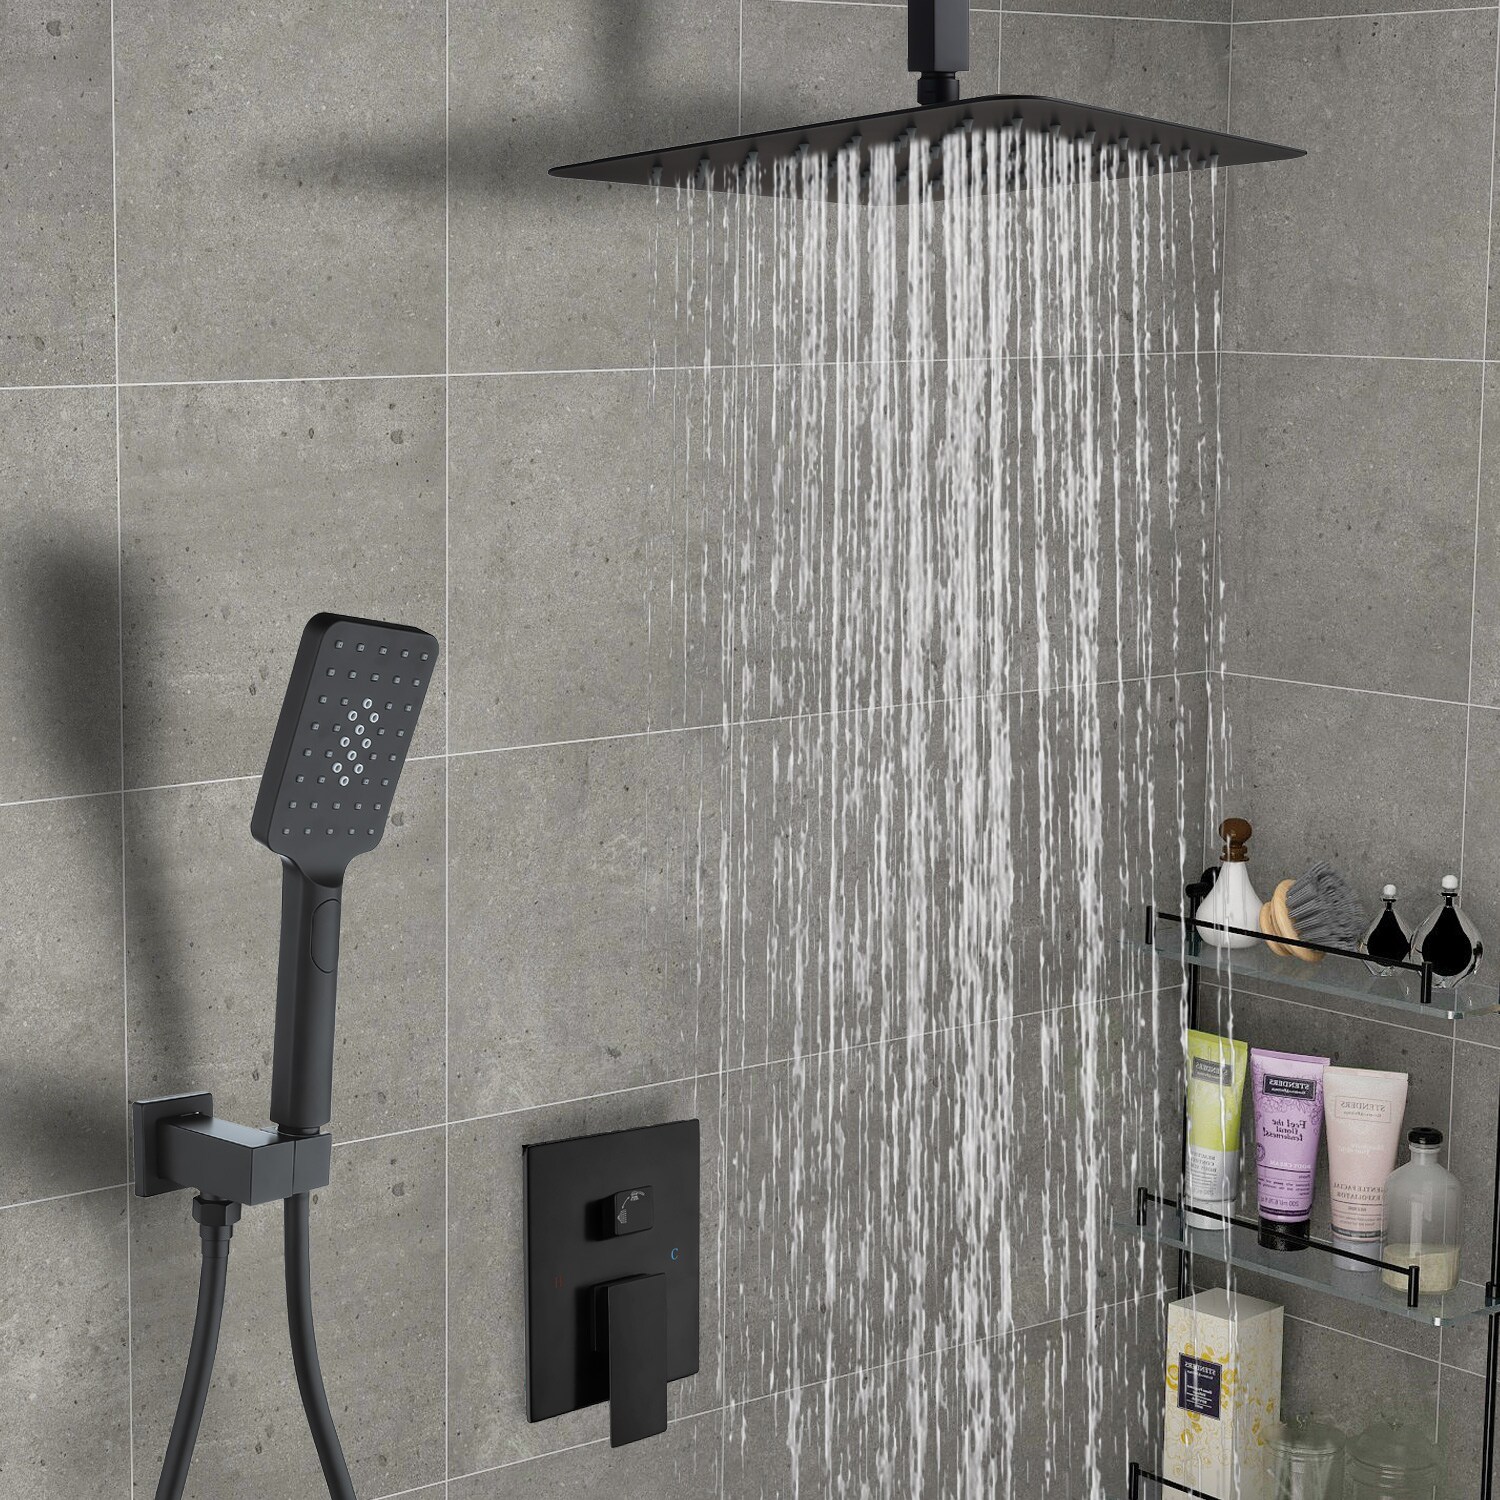 Maincraft 6-Spray Wall Mount Handheld Shower Head 1.8 GPM with